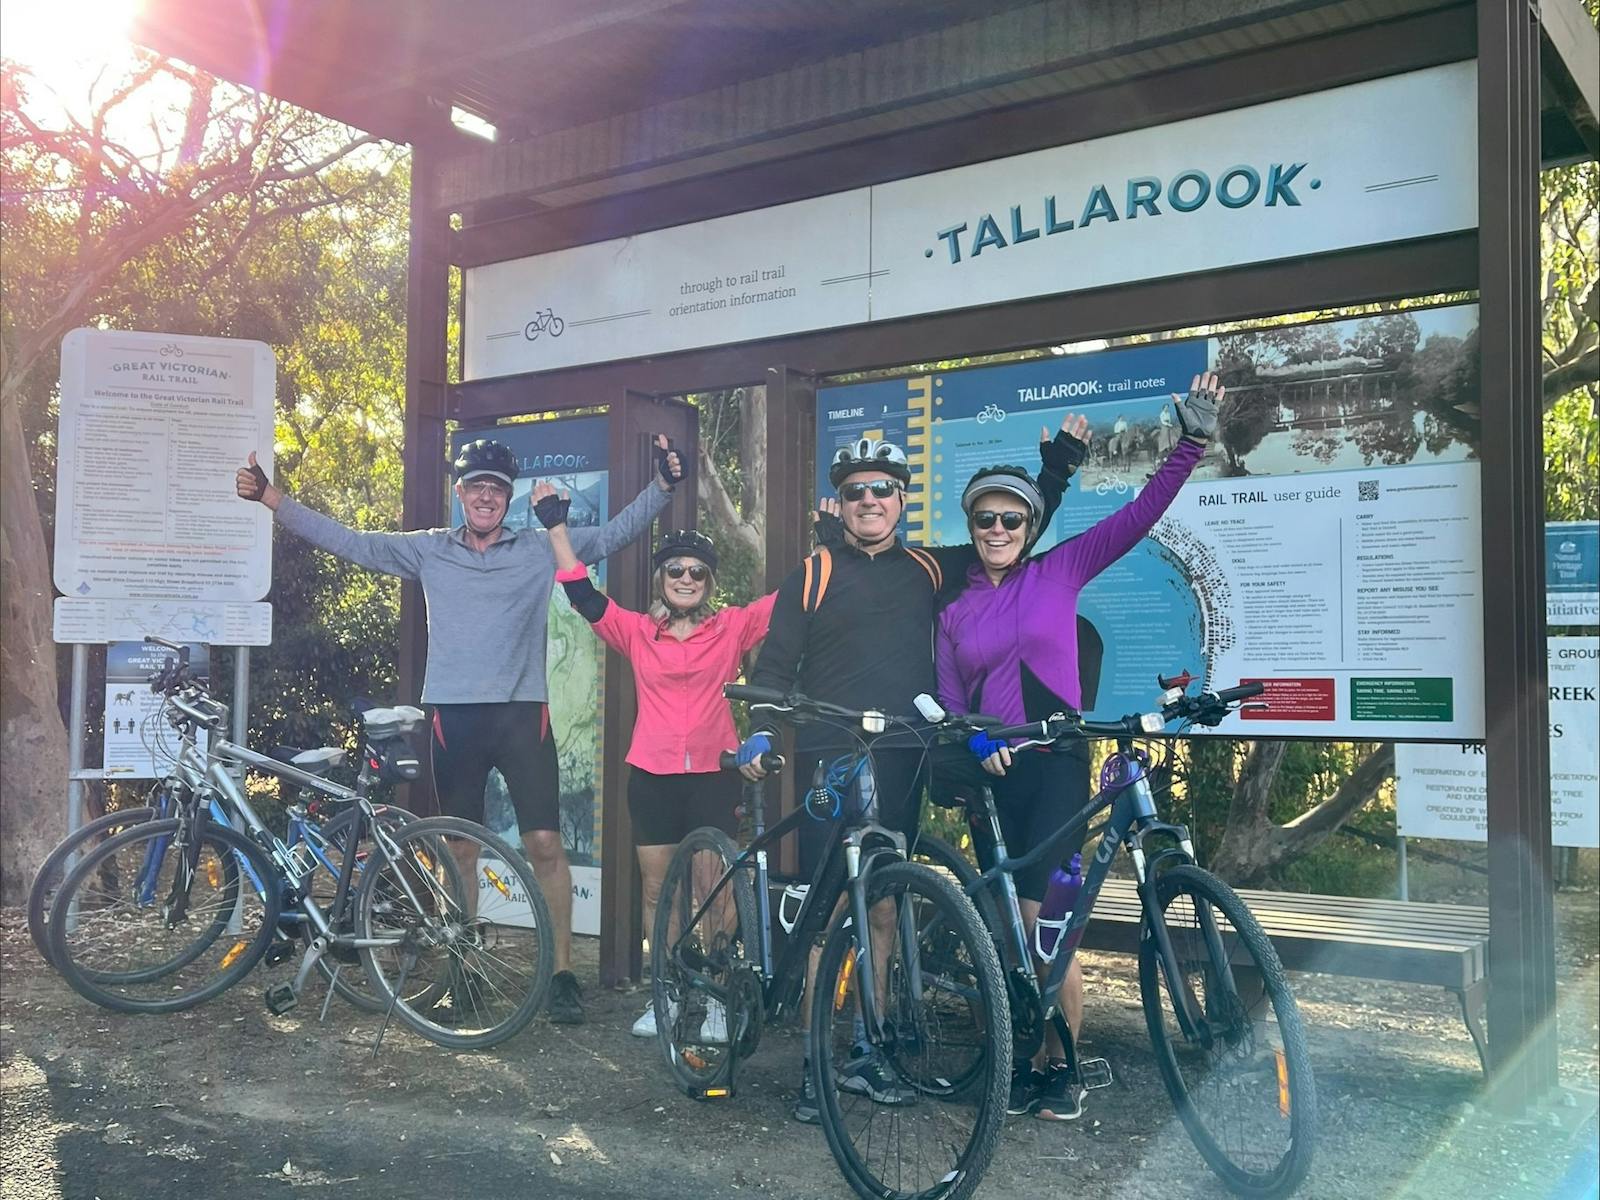 Guests celebrating riding the Great Victorian Rail Trail Mansfield to Tallarook